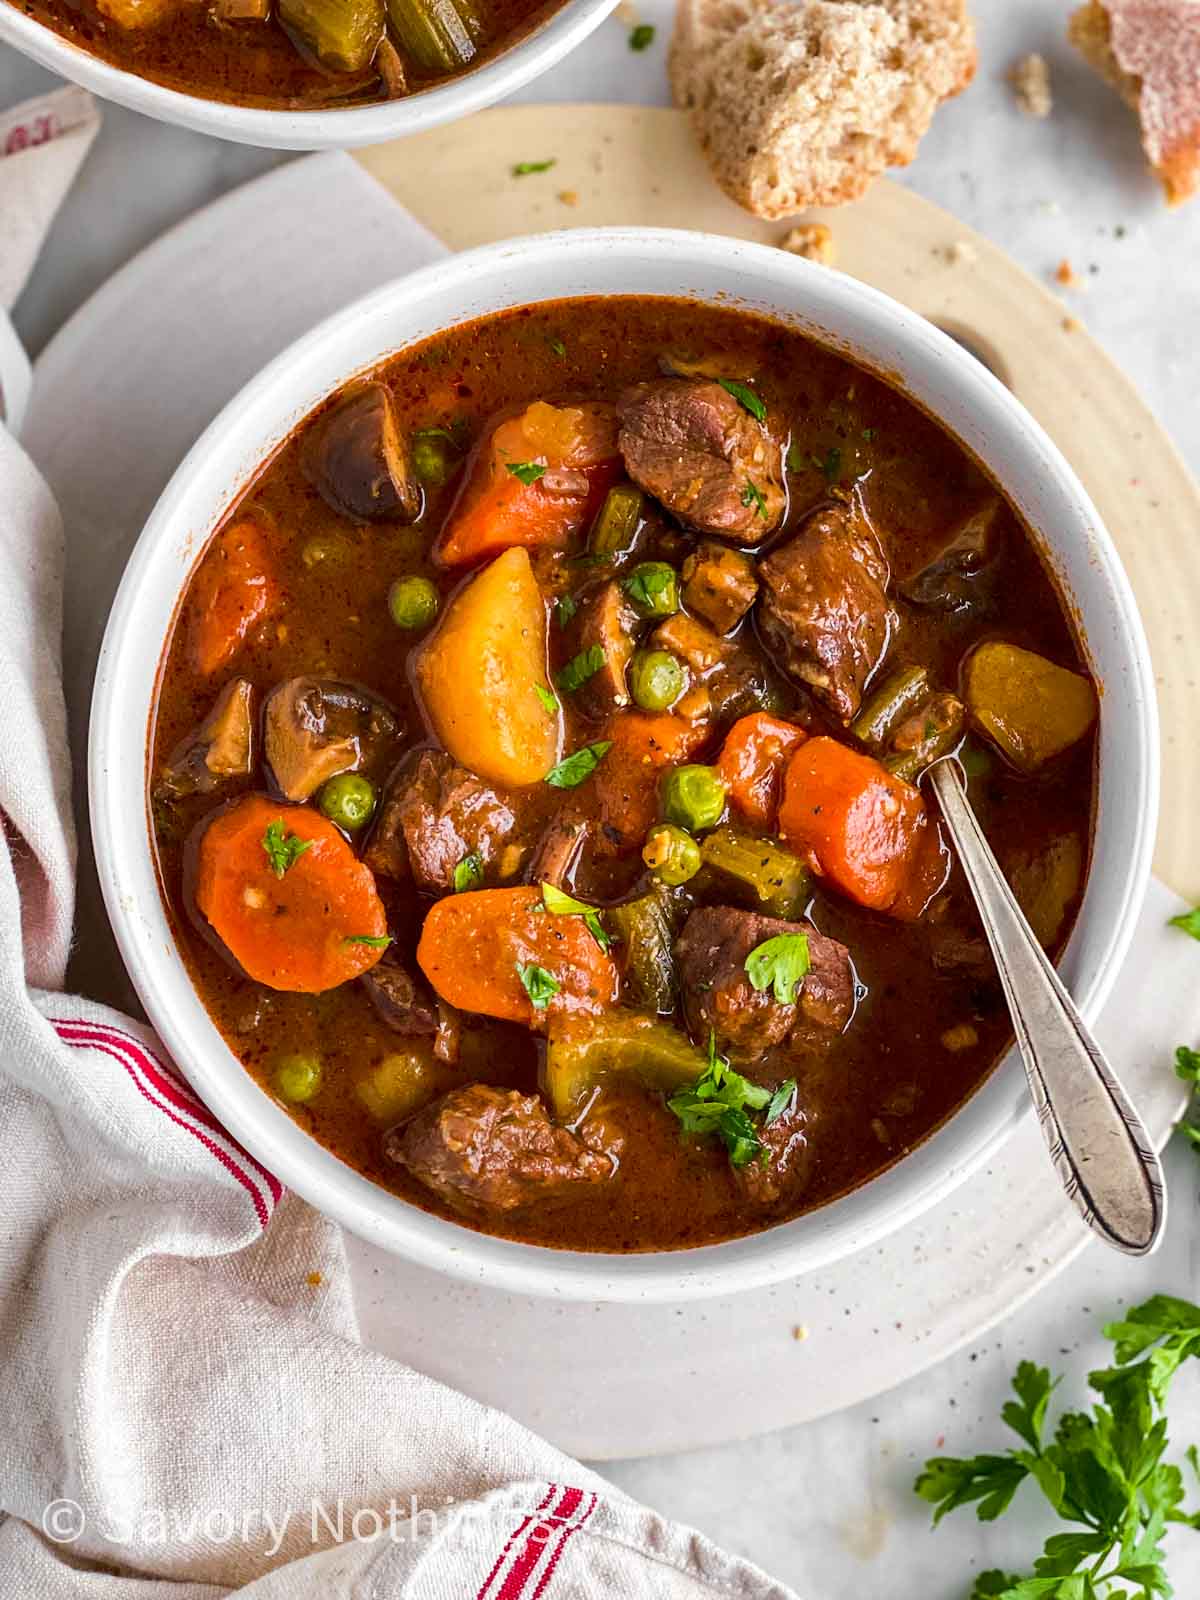 Instant Pot Beef Stew Savory Nothings